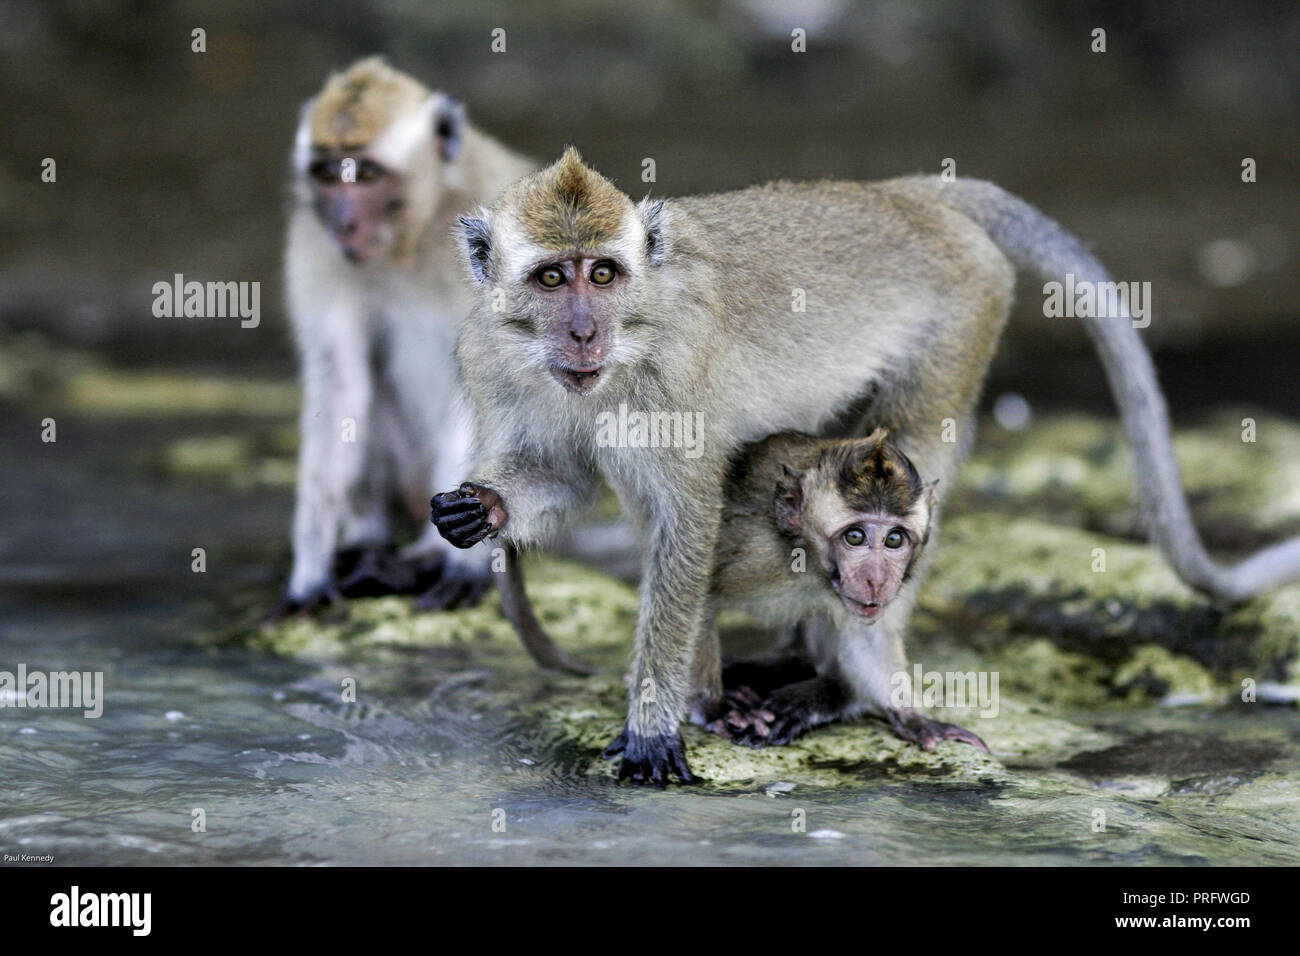 Crab eating macaque (Macaca fascicularis) monkeys on beach in Java, Indonesia Stock Photo